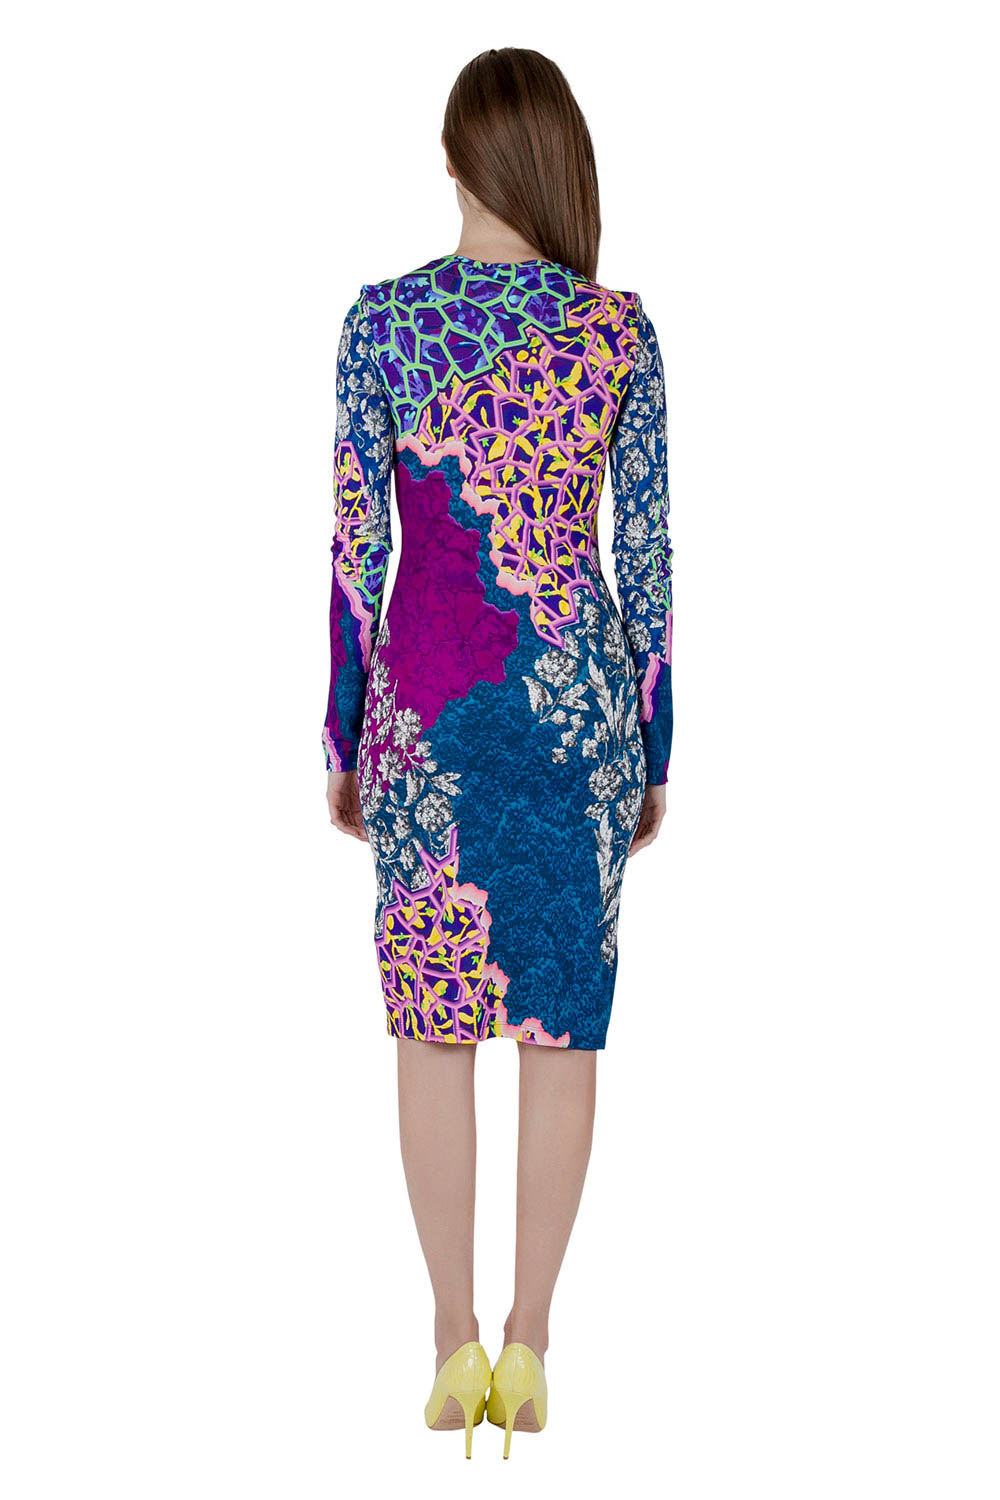 Pre-owned Peter Pilotto Multicolor Marine Print Jersey Long Sleeve Bodycon Dress S